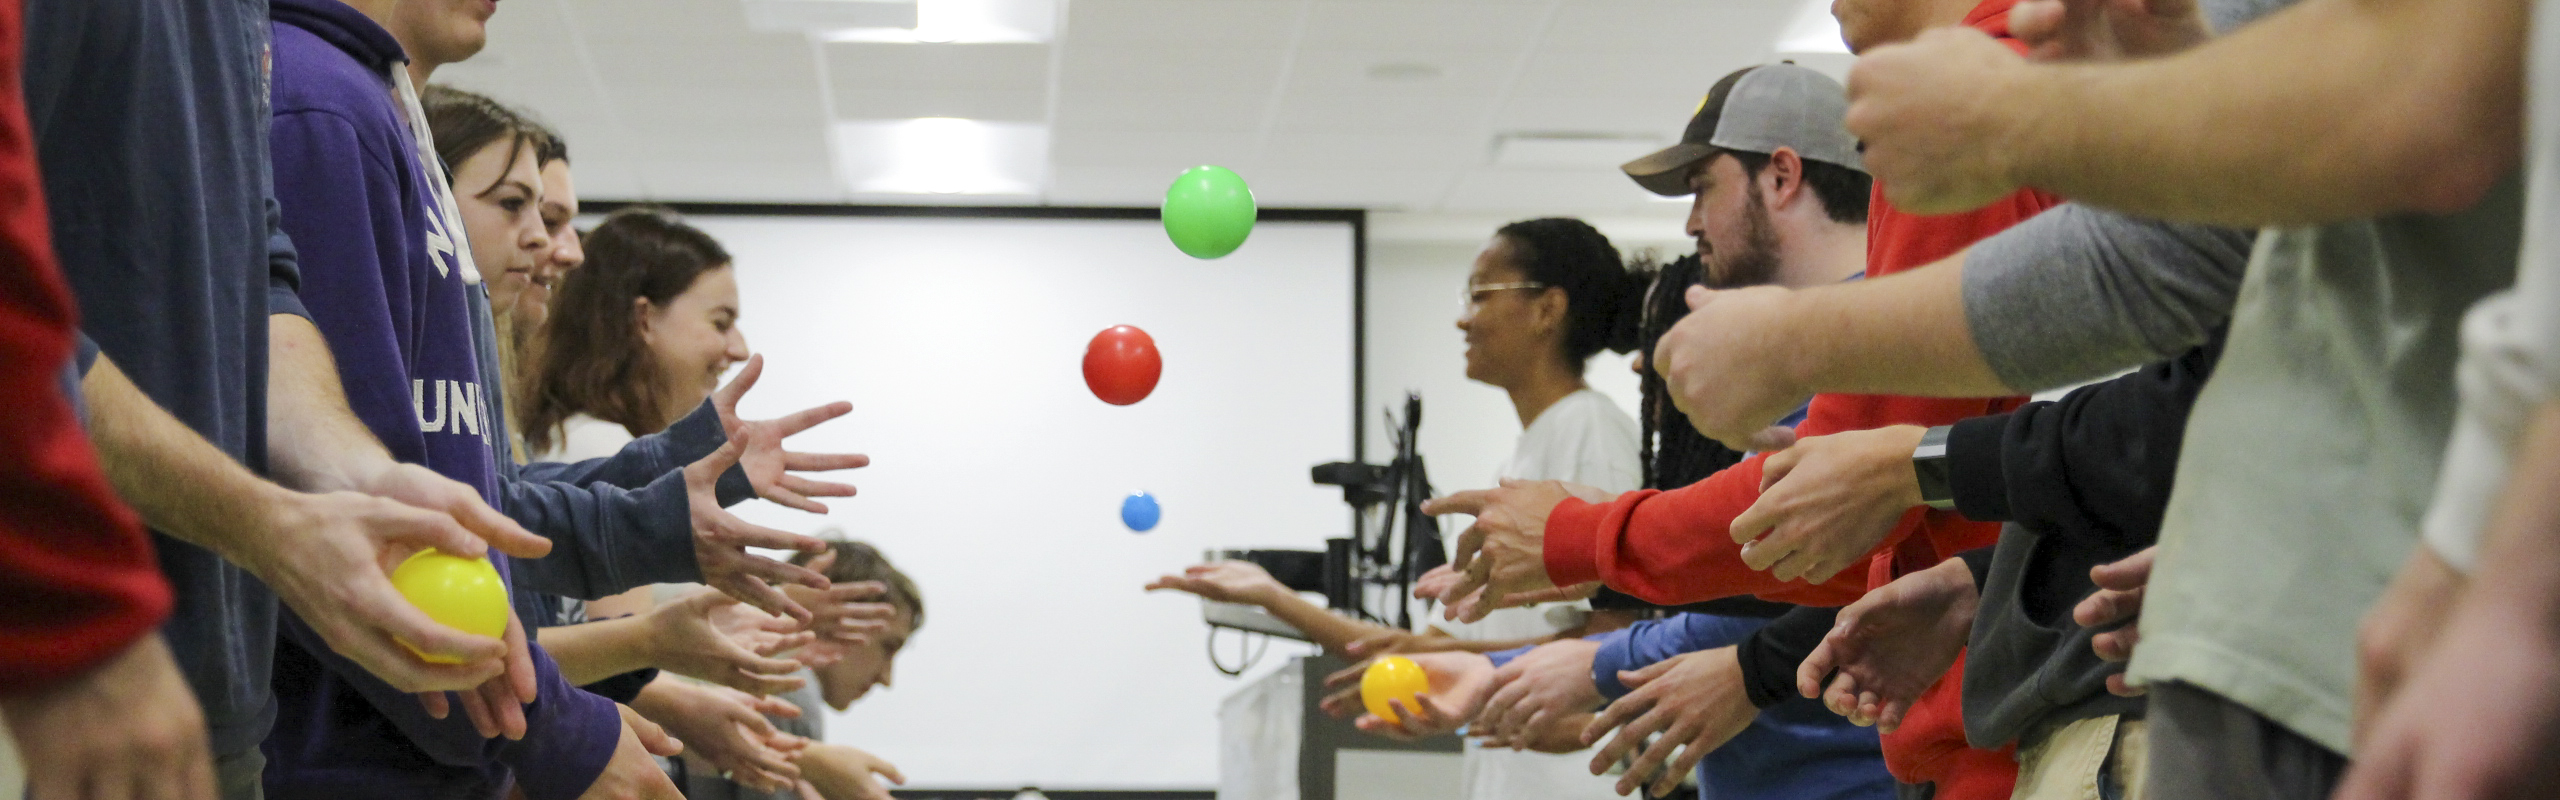 Students toss colored balls in a computer science Scrum Method exercise. Earn your bachelor degree in computer science at Elon University.